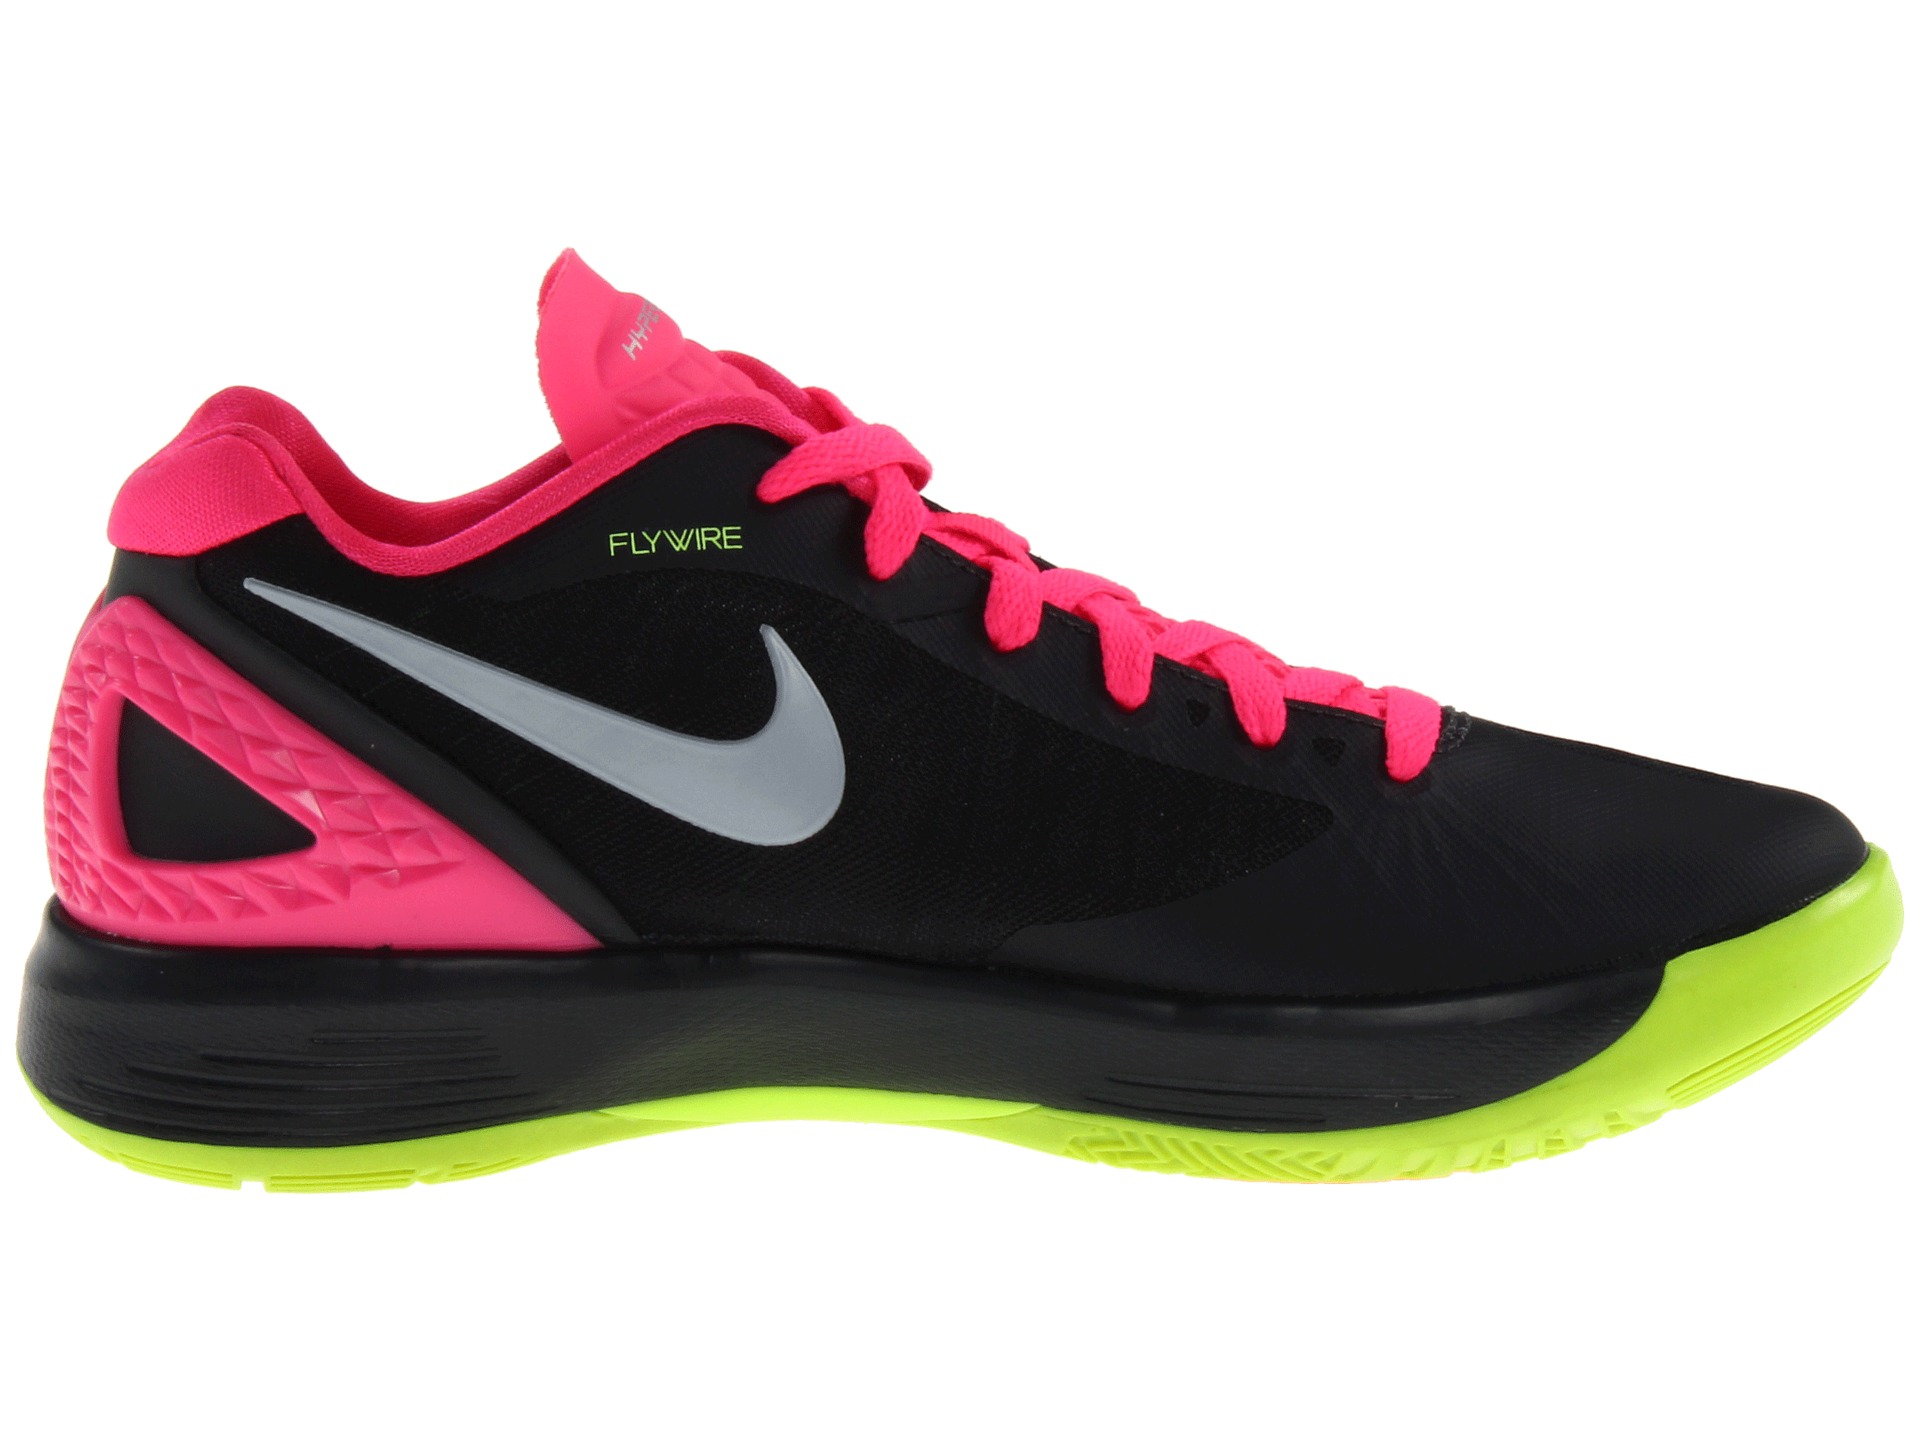 zappos womens volleyball shoes